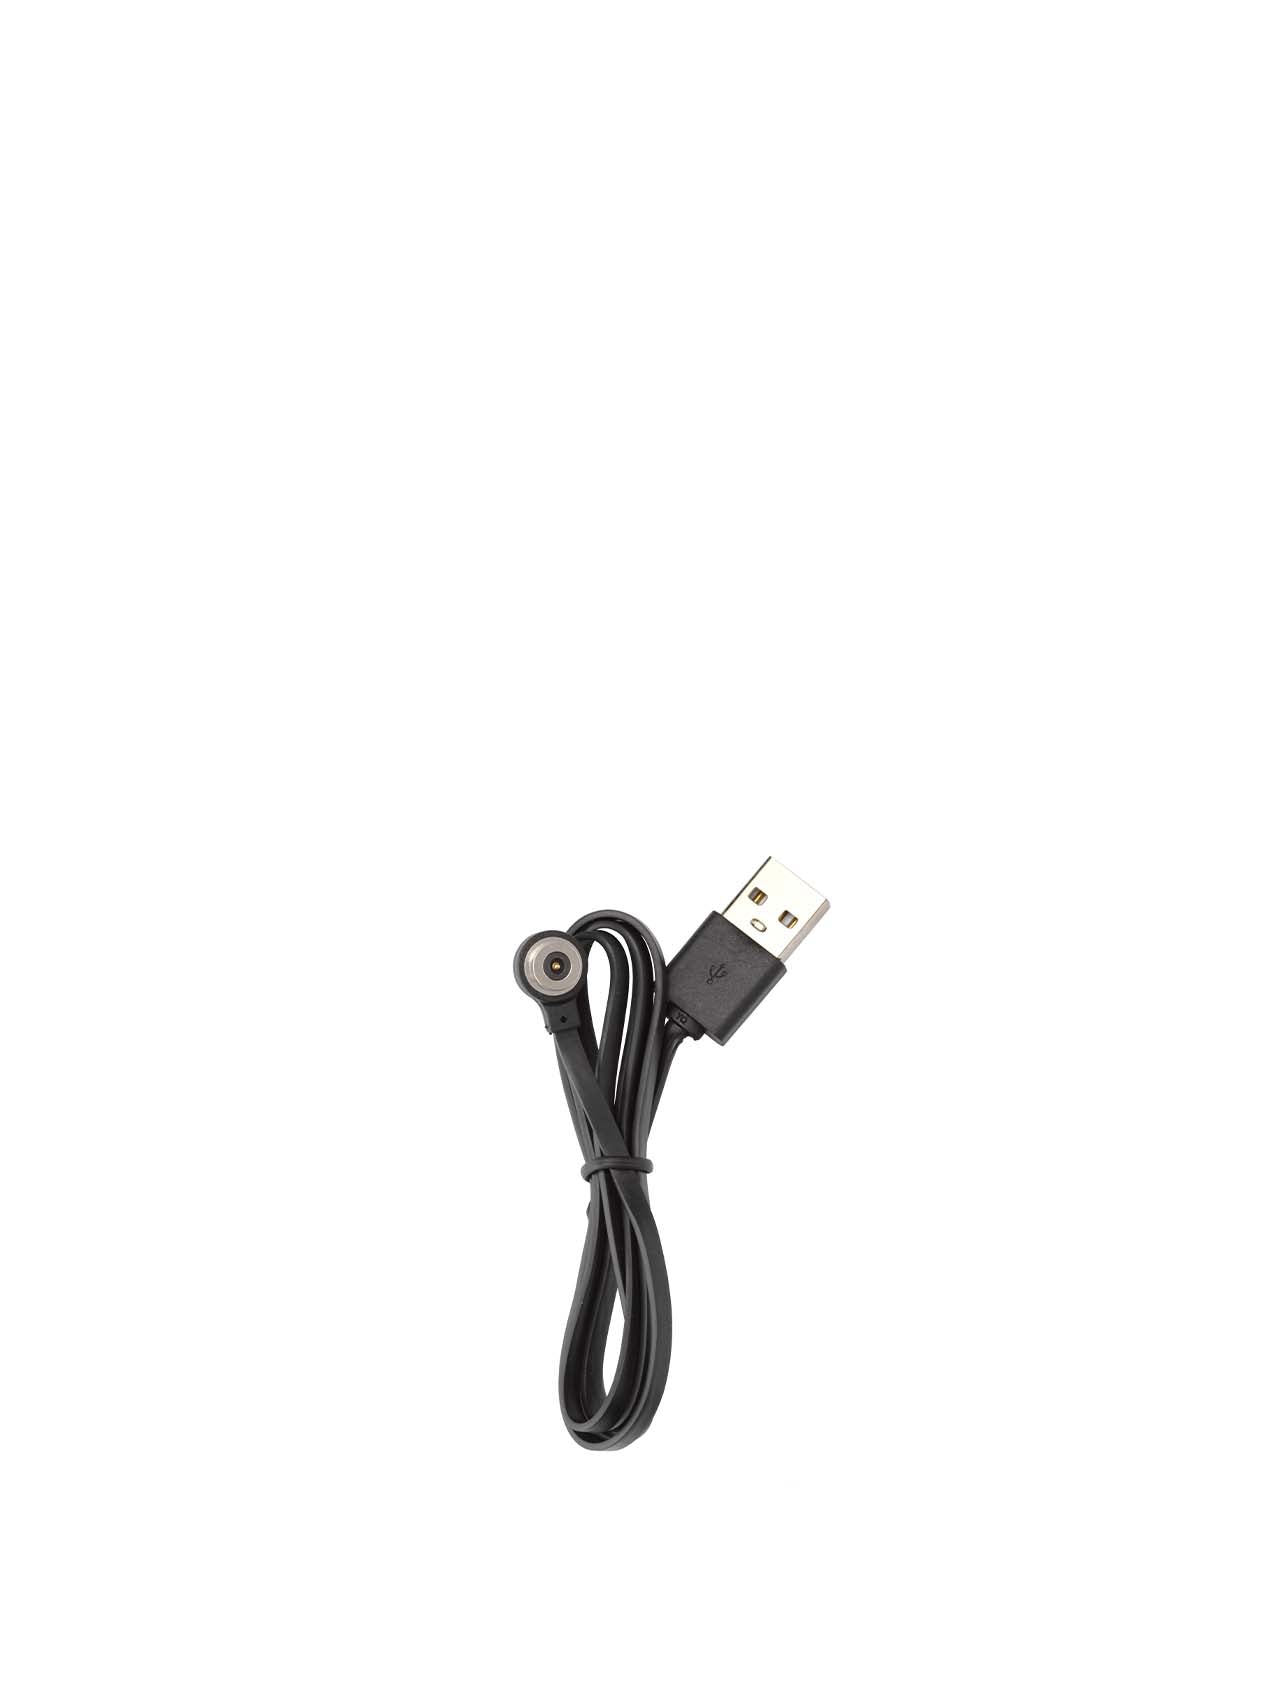 Charging Cable, Portable